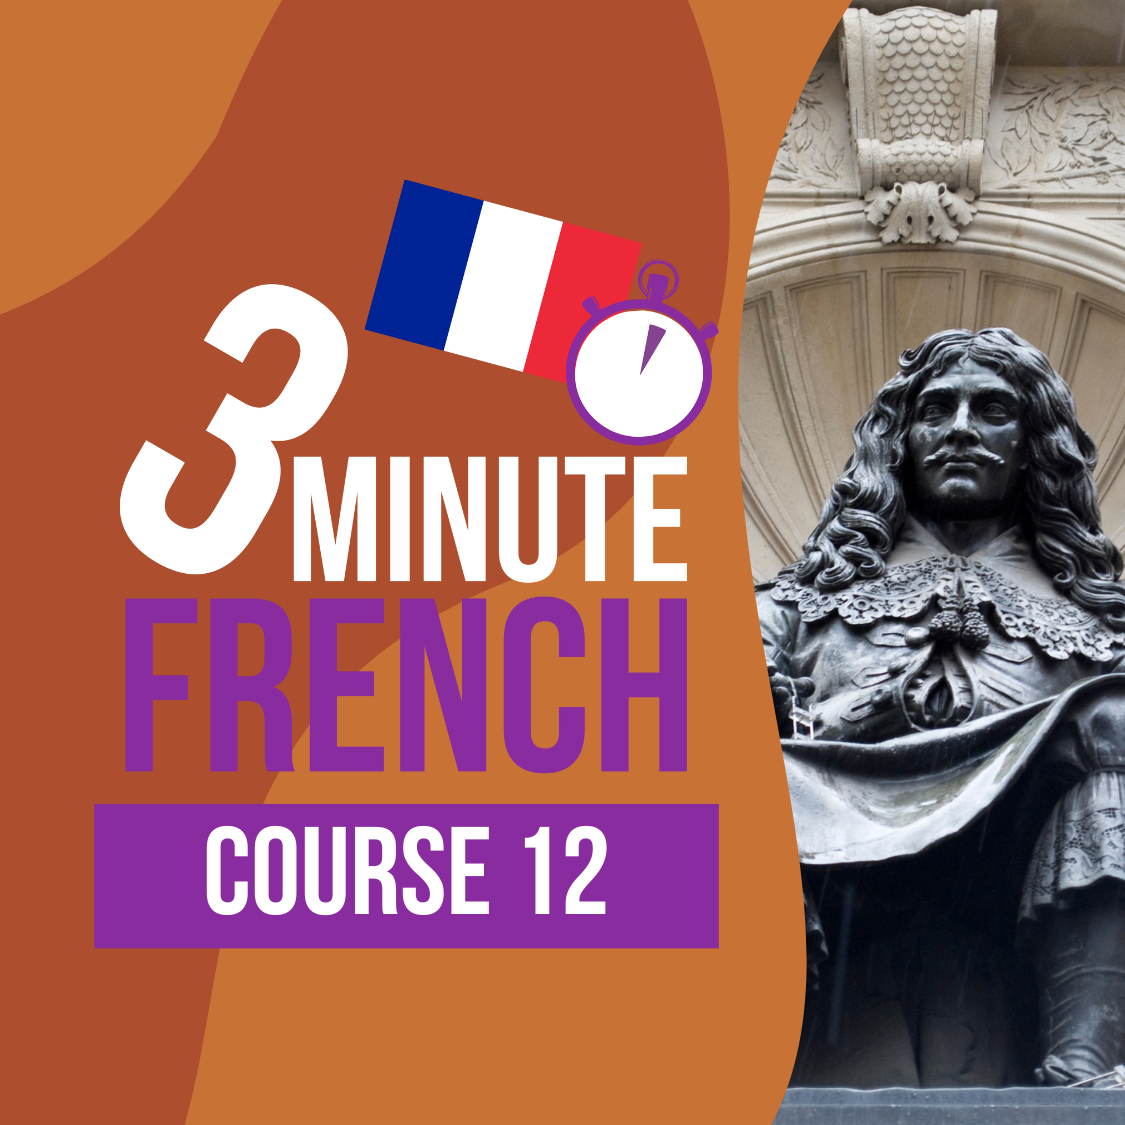 3 Minute French - Course 12